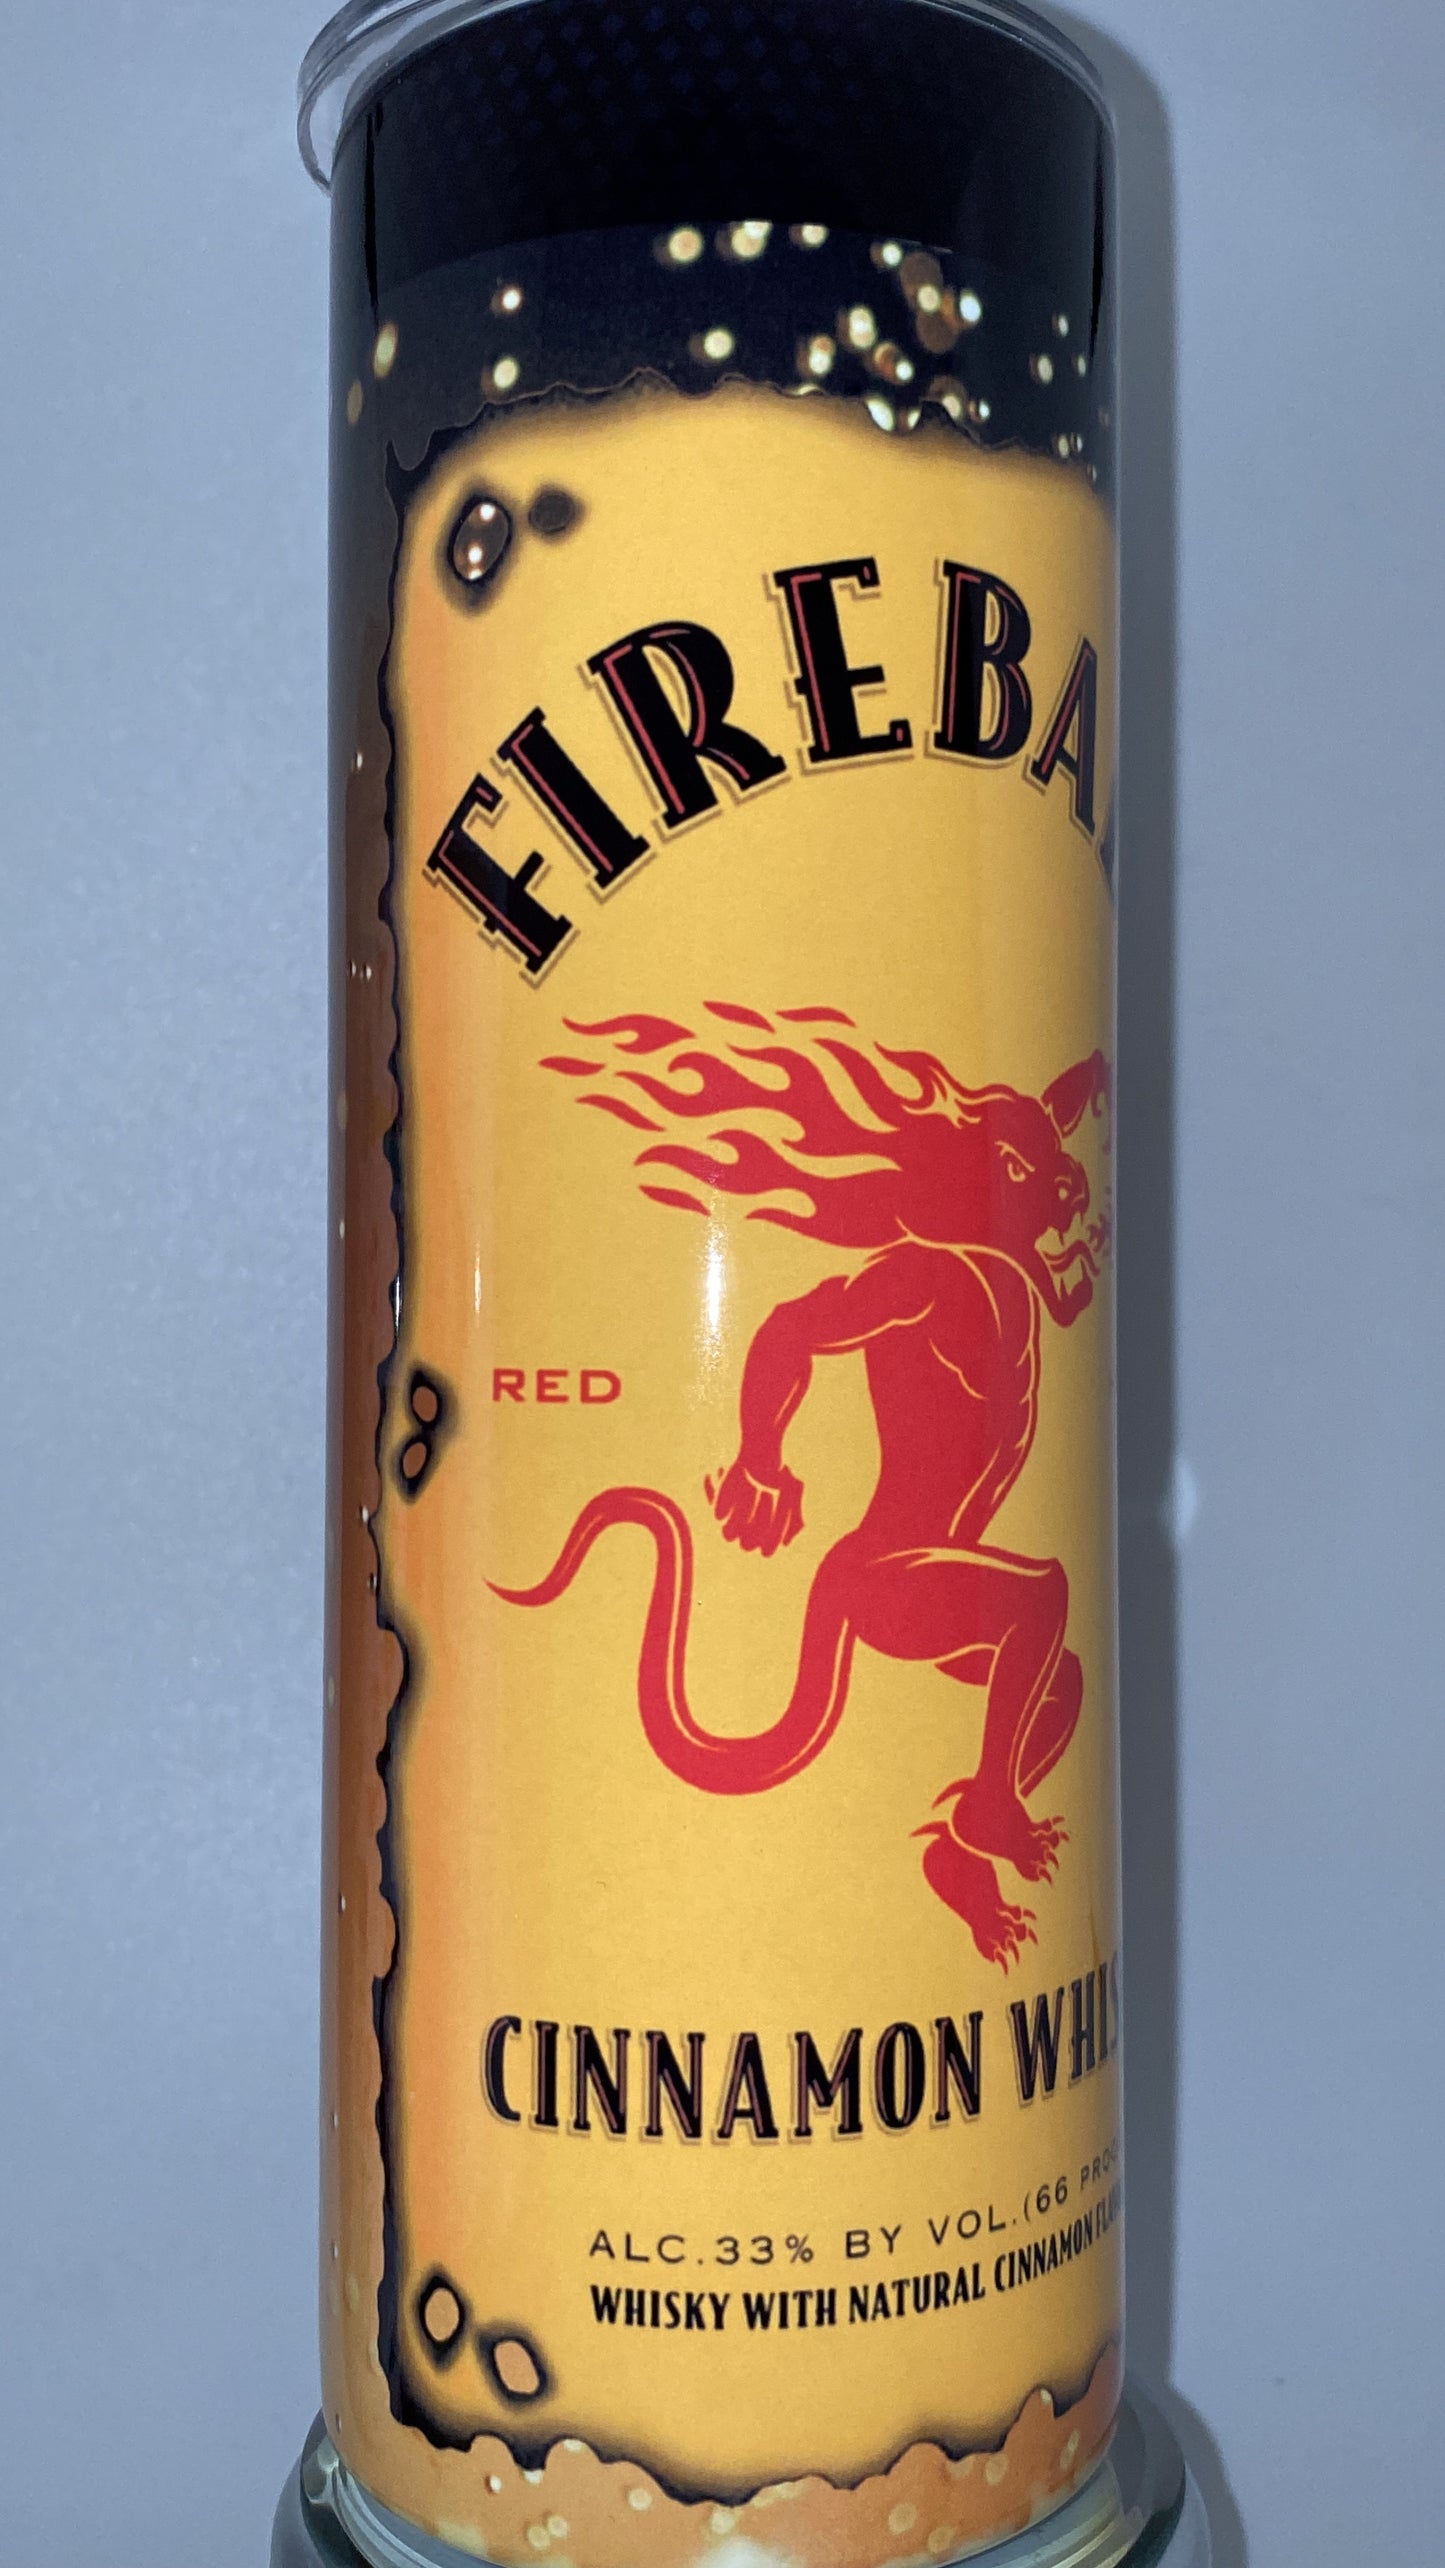 Fireball liquor, drink, inspired 20 oz drinking Tumbler for HOT and COLD drinks